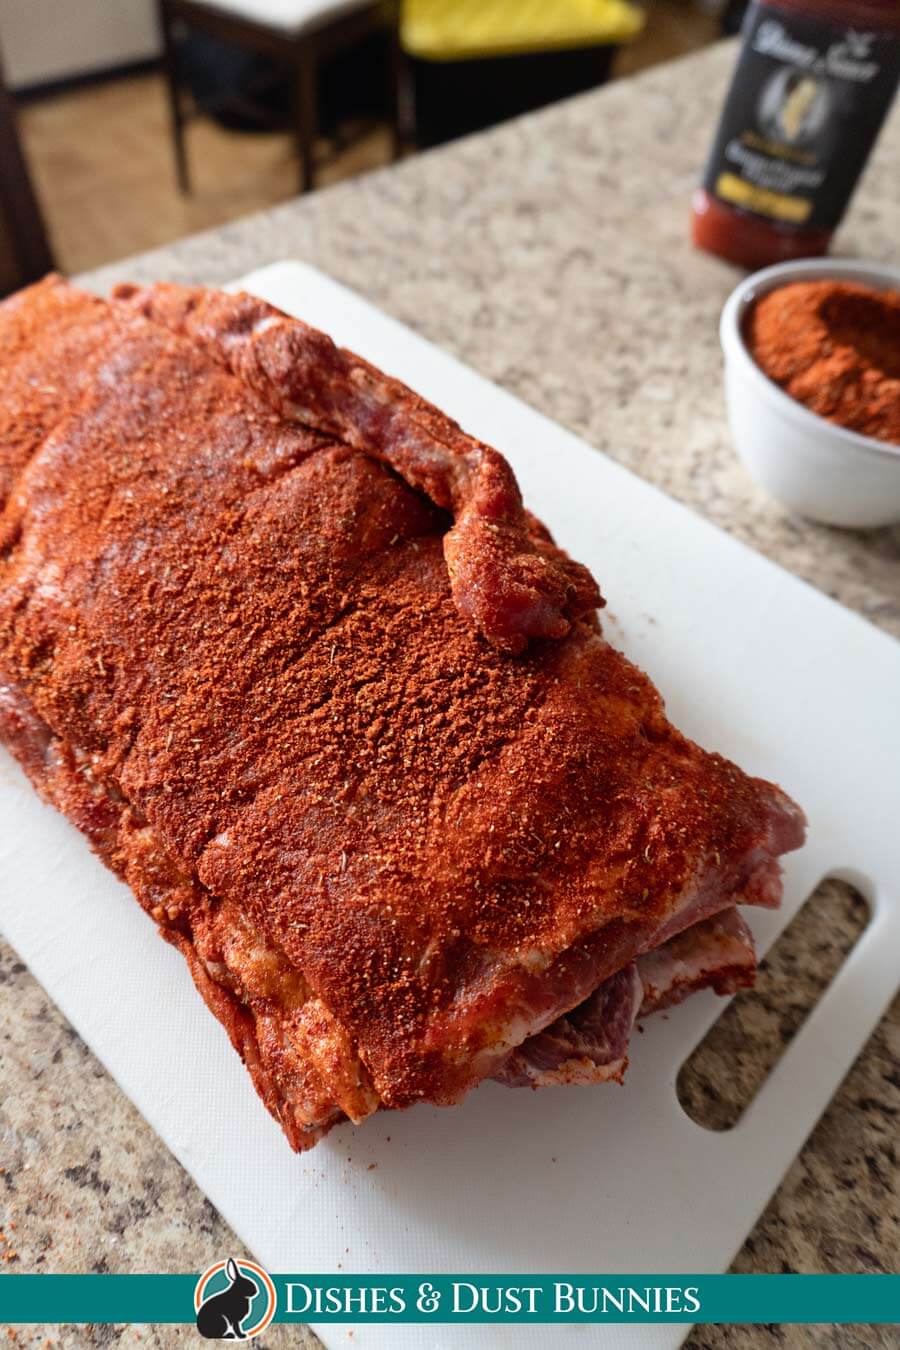 The Best Dry Rub for Pork Ribs